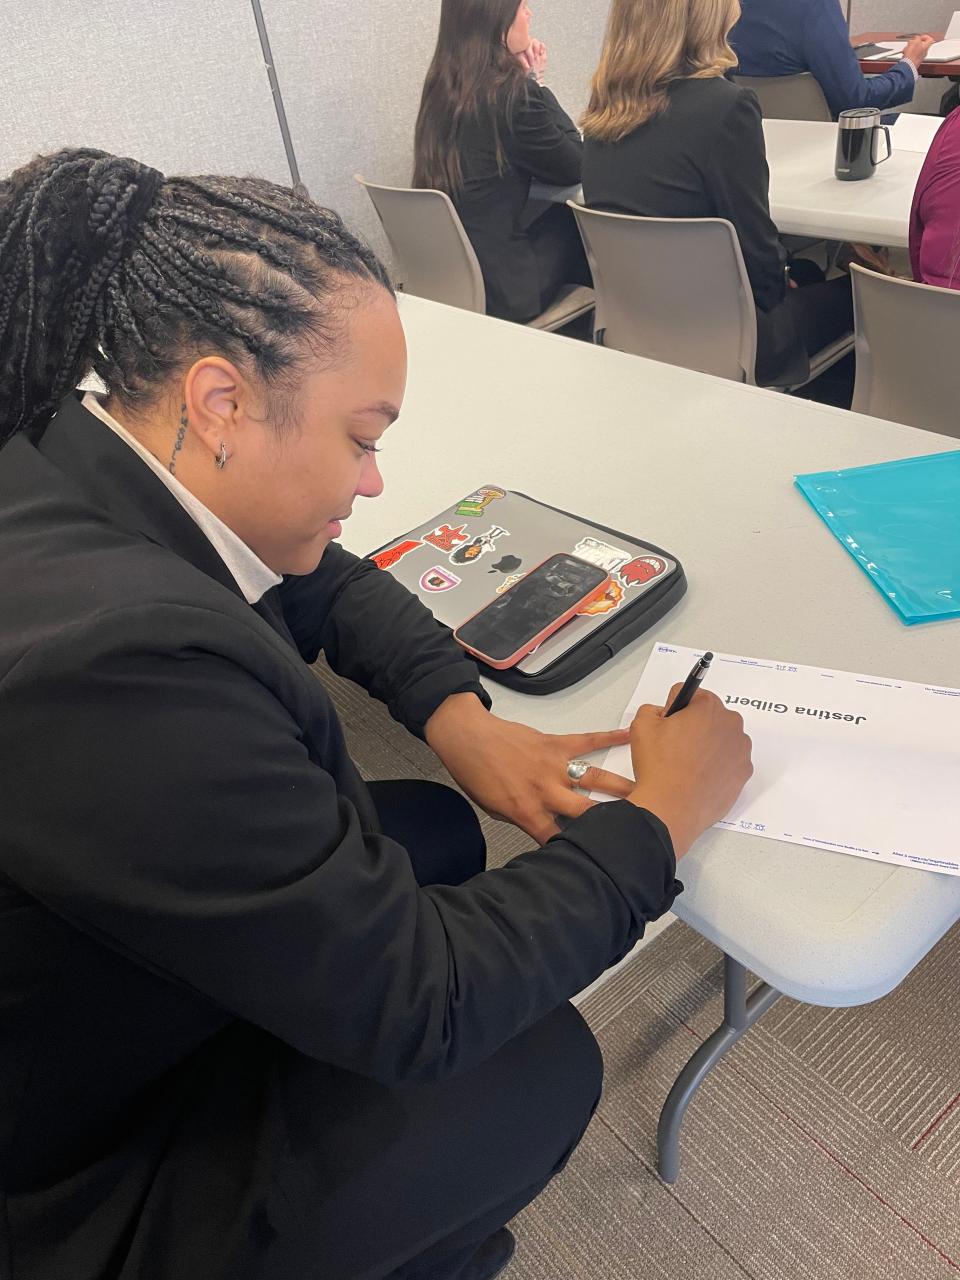 Glastonbury resident Jestina Gilbert was one of 23 civilian participants taking part in a Law Enforcement Council of Connecticut seminar in Norwich on Saturday.